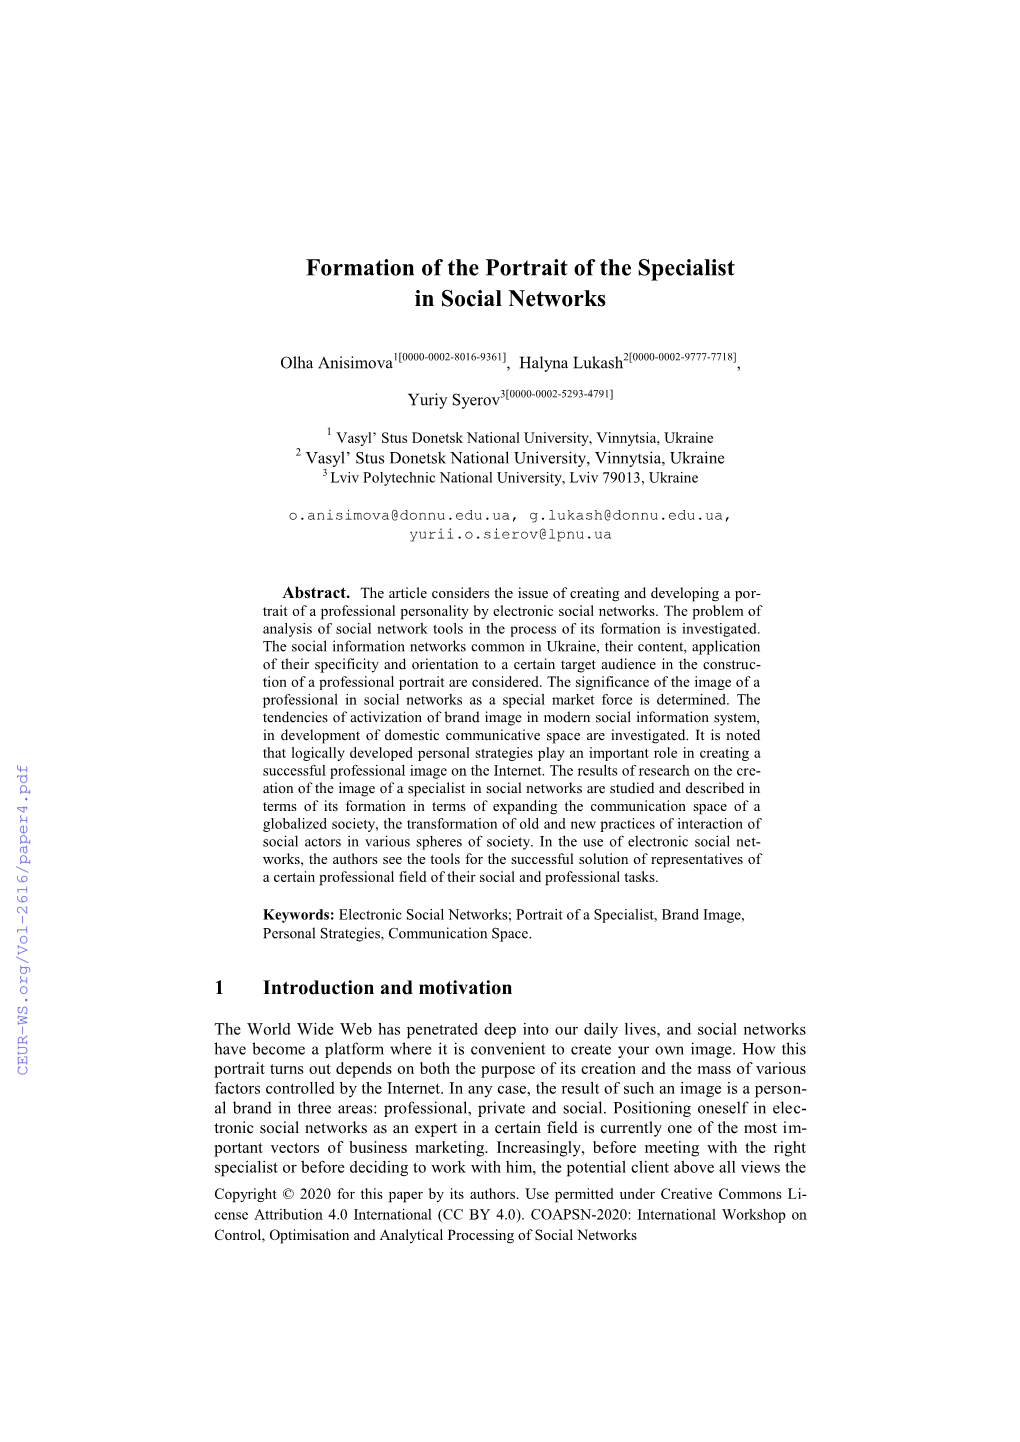 Formation of the Portrait of the Specialist in Social Networks